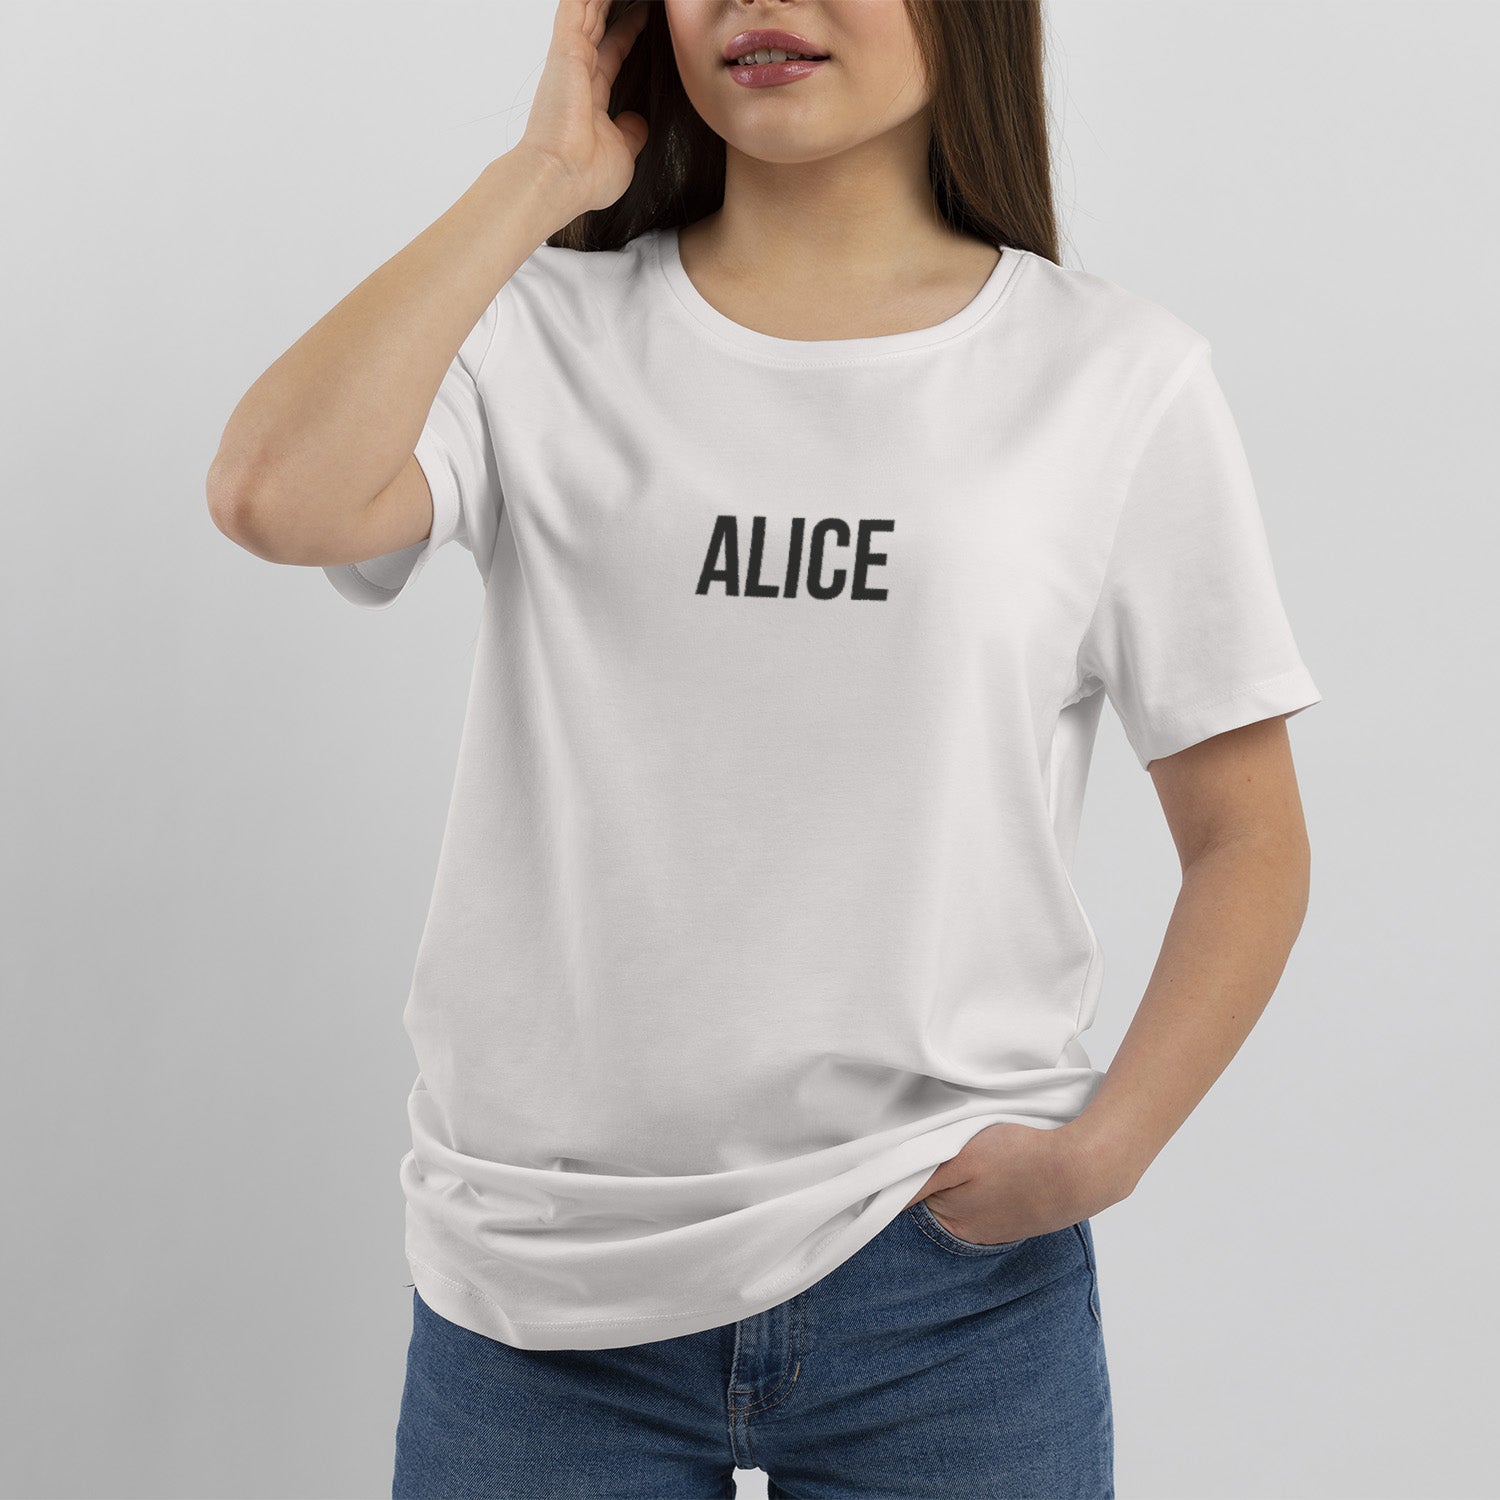 Witziges Personalisiertes T-Shirt mit Name